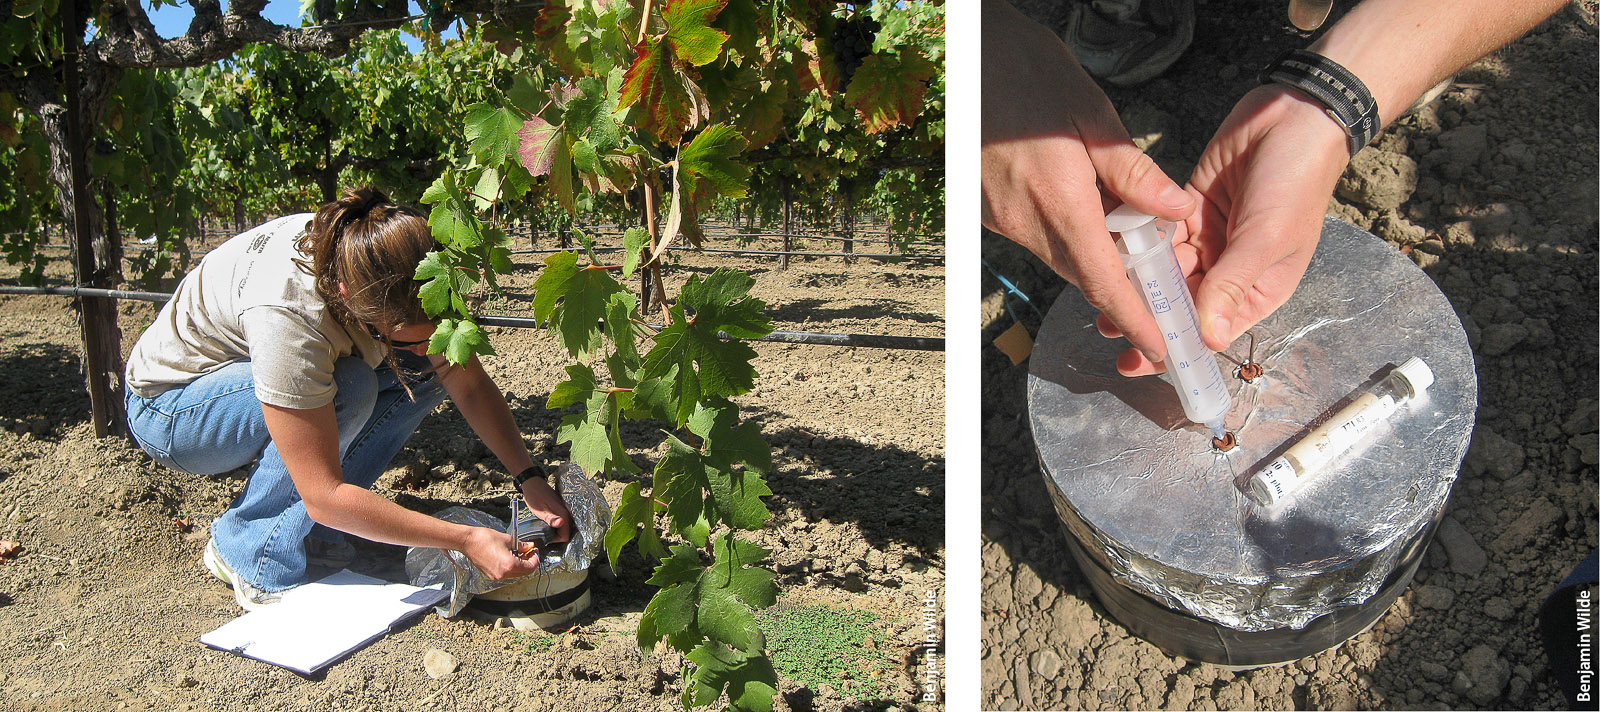 Author Gina Garland (left) records chamber temperatures and (right) takes chamber gas samples in a vineyard.